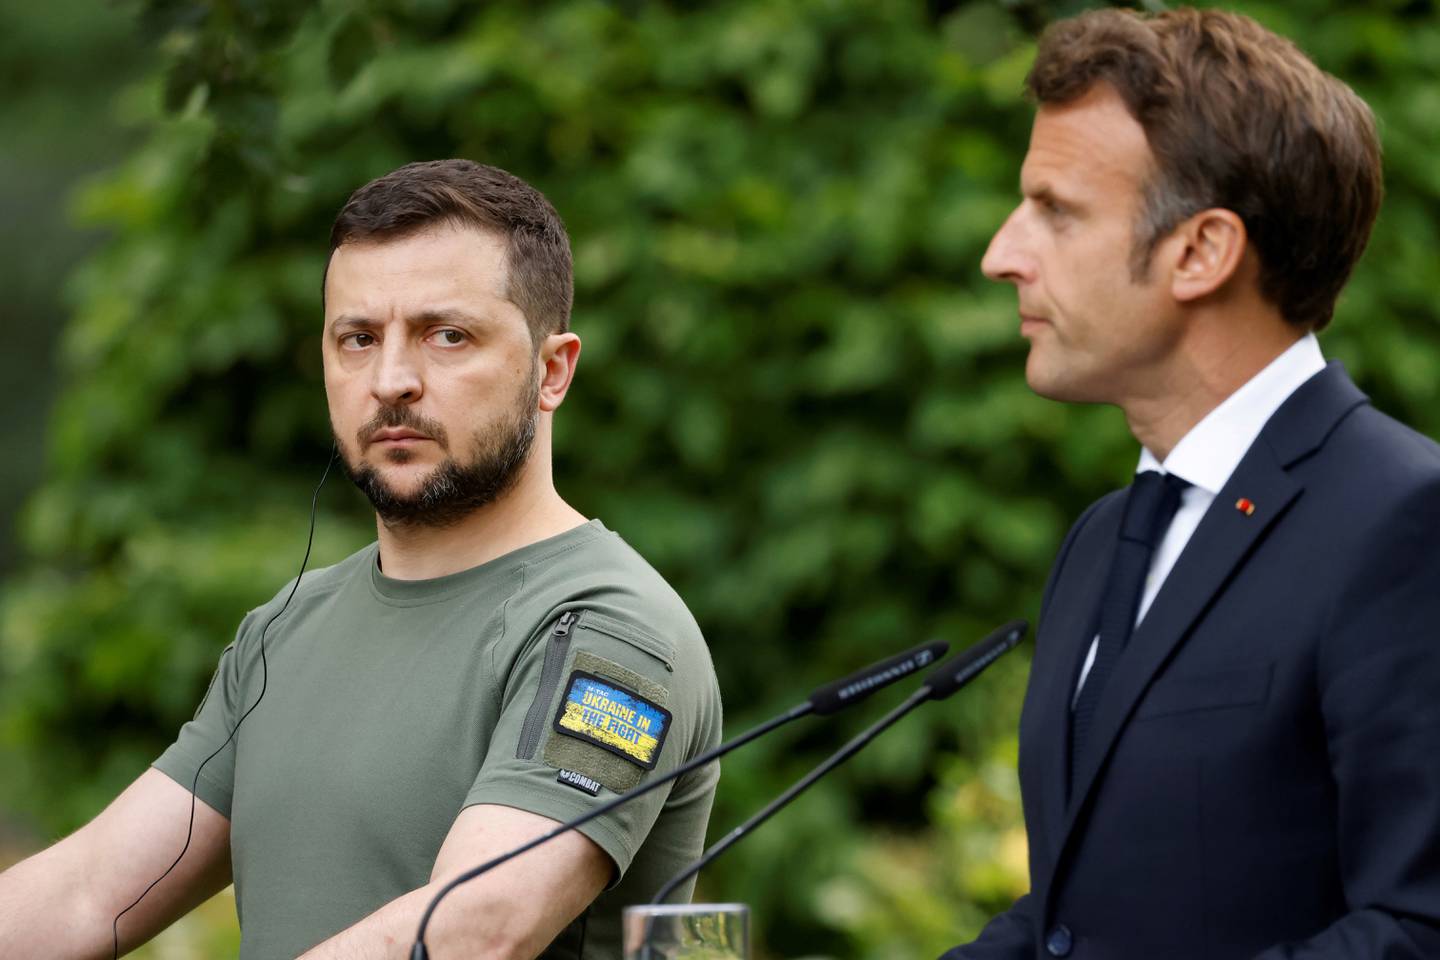 Mr Macron's proposal was partly intended to appease the European ambitions of leftist Ukrainian President Volodymyr Zelenskyy and other leaders.  PA 